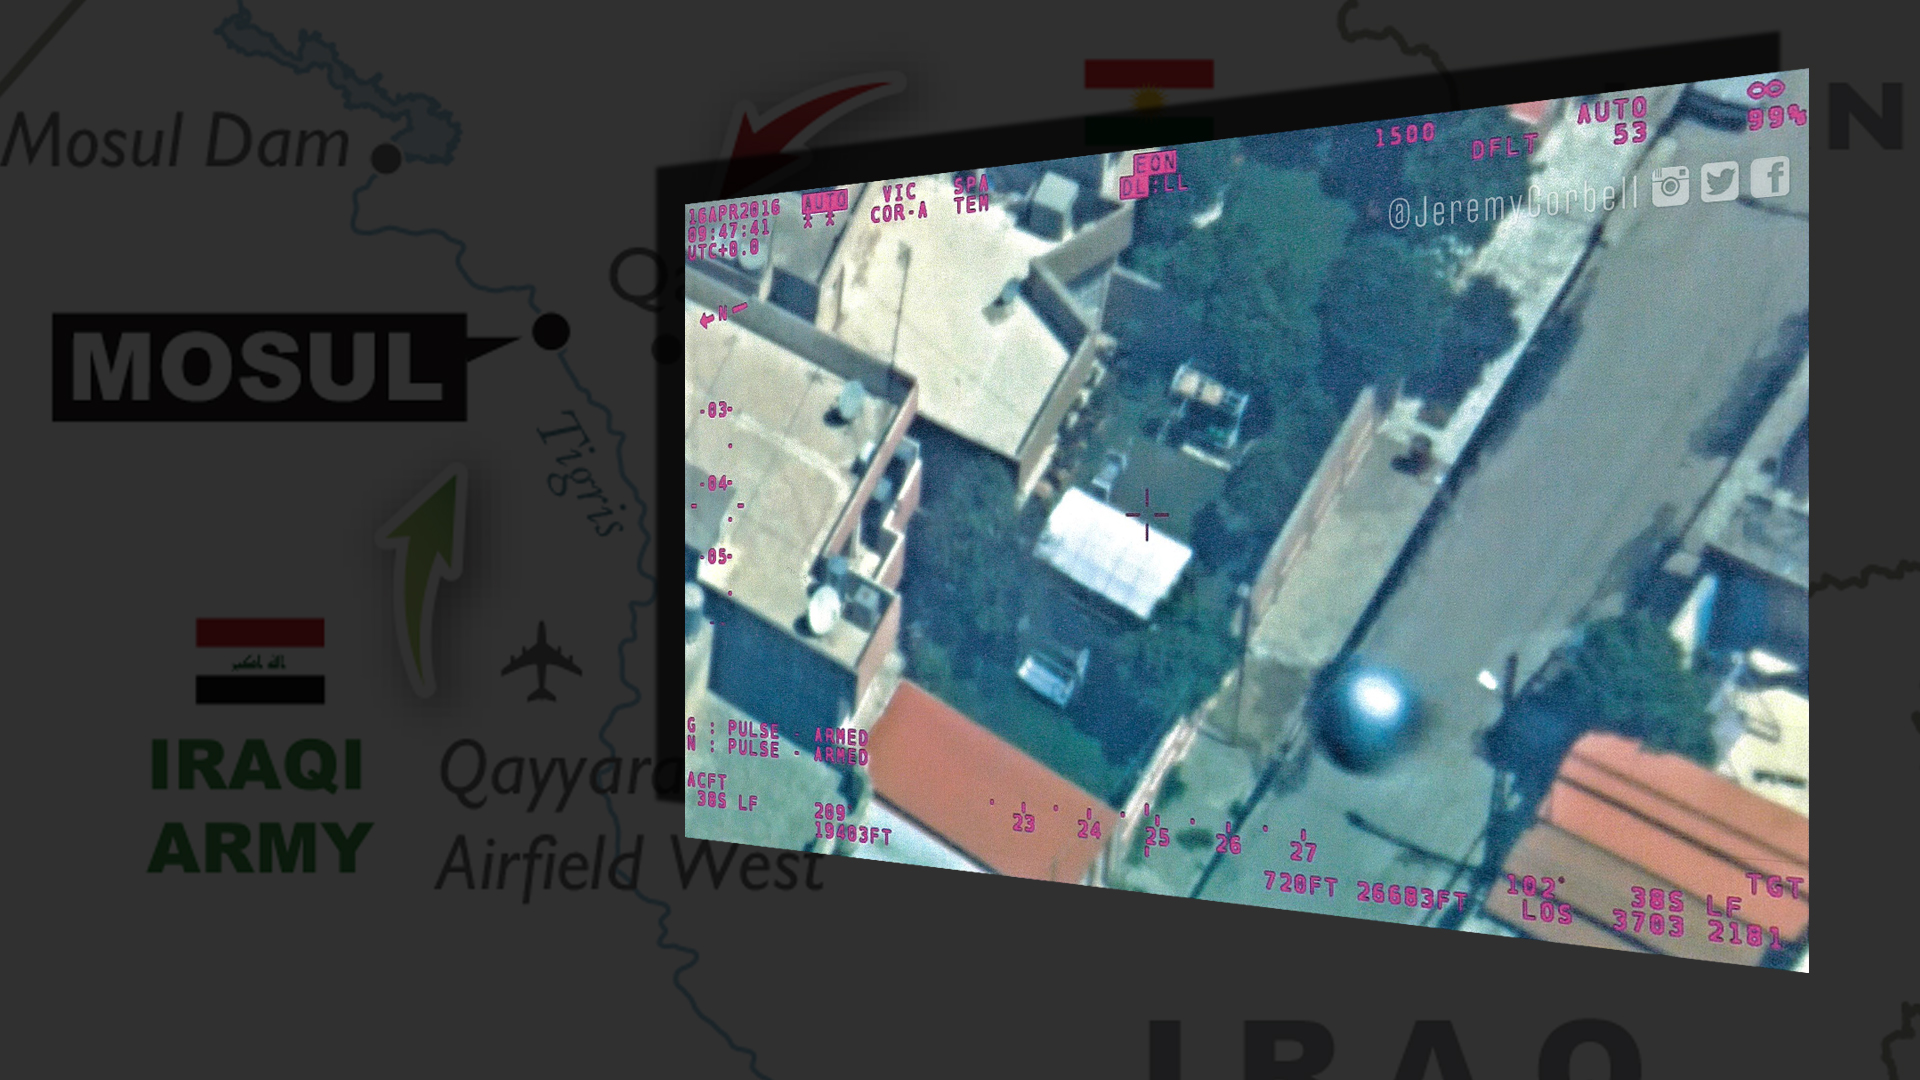 New UAP Leaked Imagery from the DoD: “Mosul Orb” UAP Published by Jeremy Corbell & George Knapp